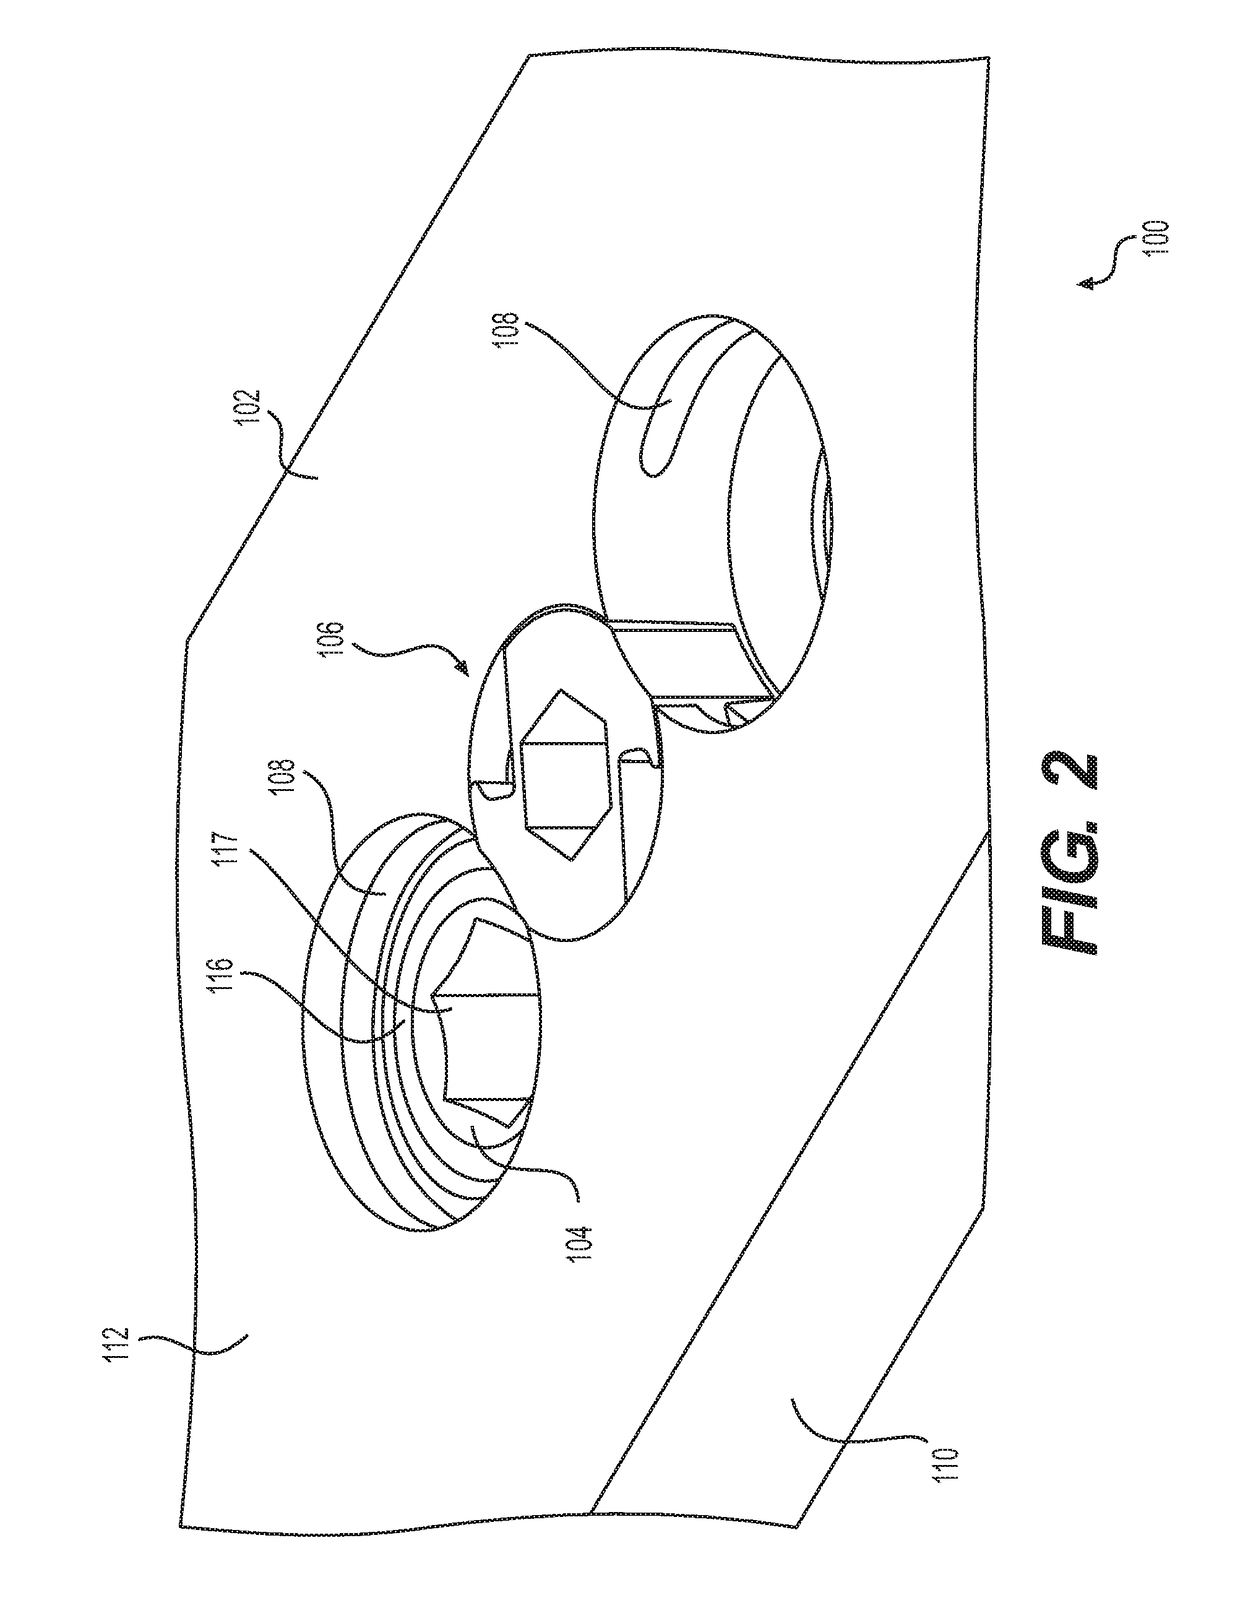 Spinal plate assembly having locking mechanism